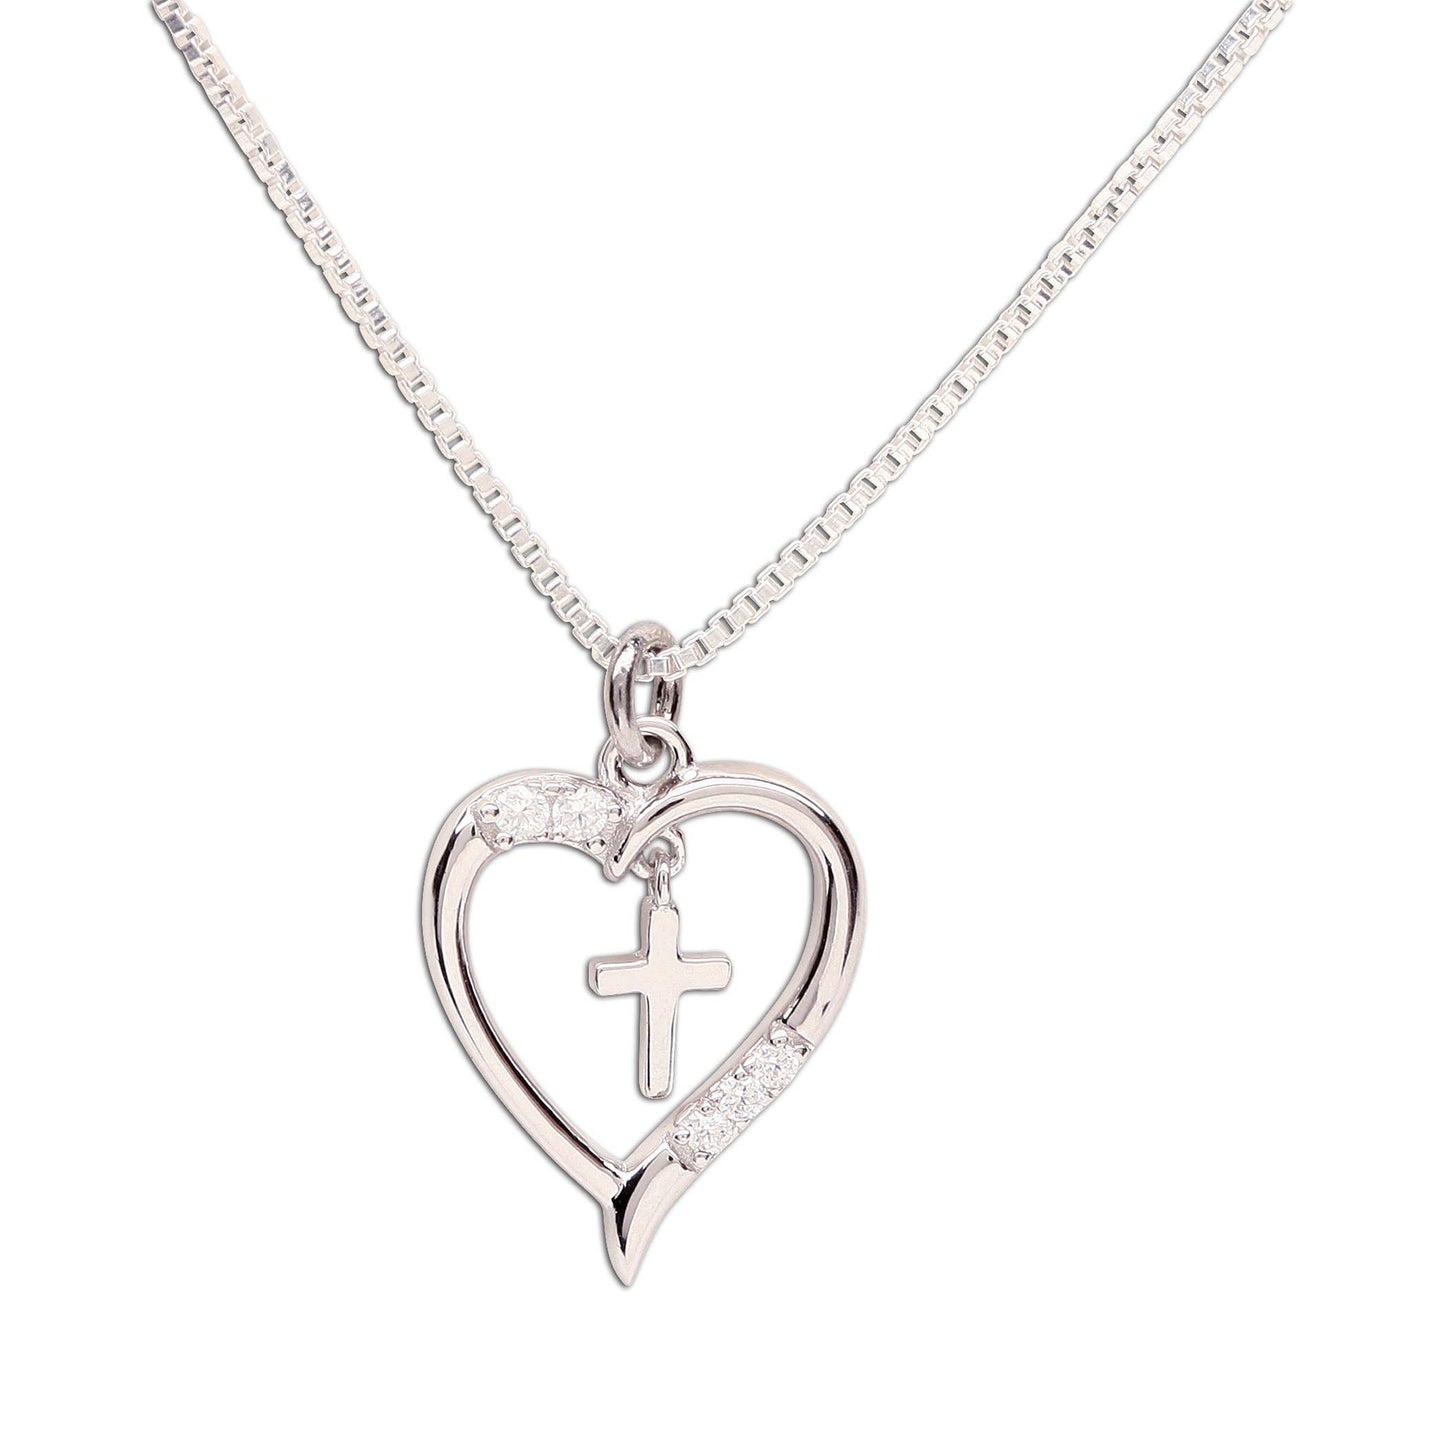 Cherished Moments - Sterling Silver Children's Cross Heart Necklace for Girls